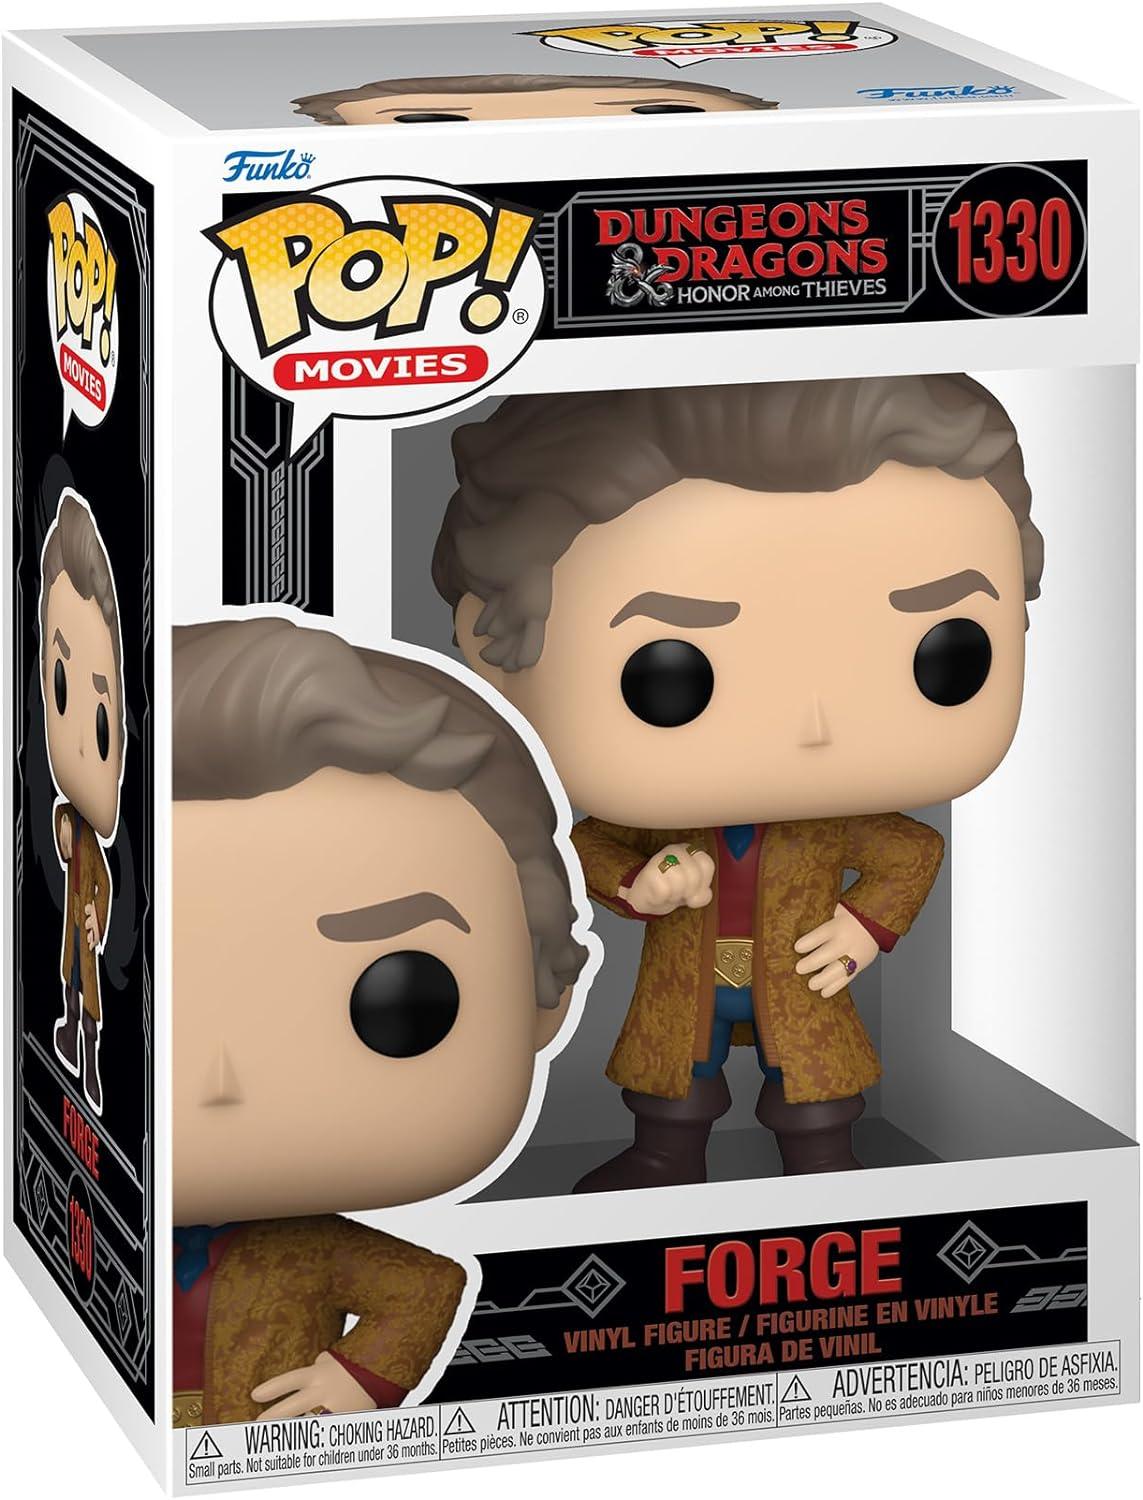 Dungeons & Dragons: Funko Pop! Movies - Forge #1330 - Magic Dreams Store